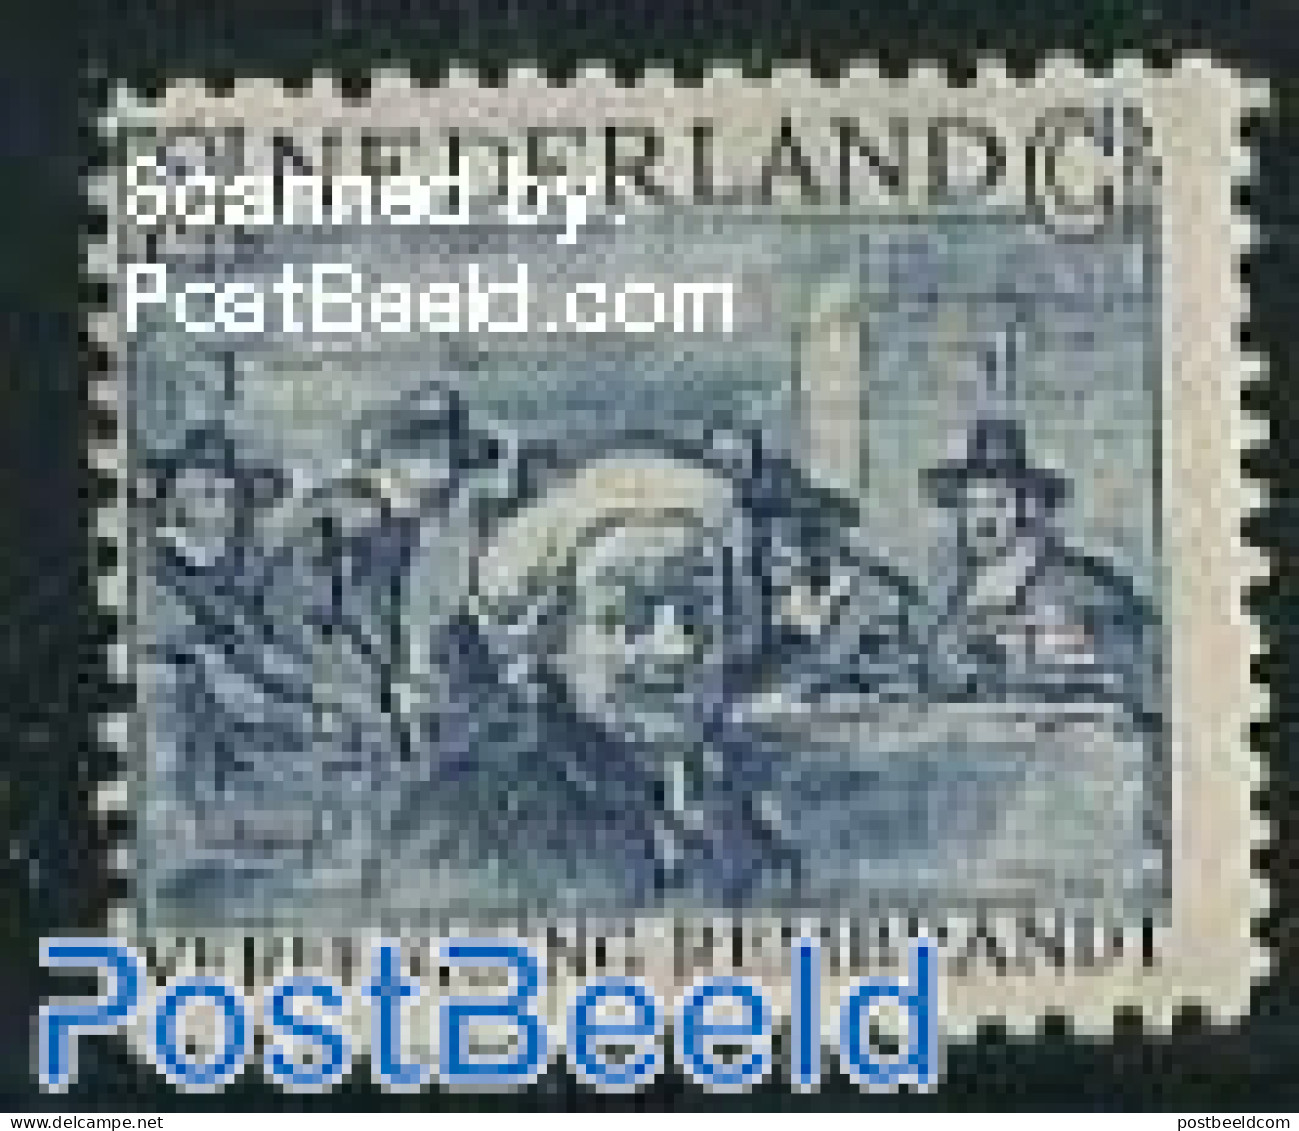 Netherlands 1930 12.5+5c, Rembrandt, Stamp Out Of Set, Mint NH, Art - Paintings - Rembrandt - Self Portraits - Neufs